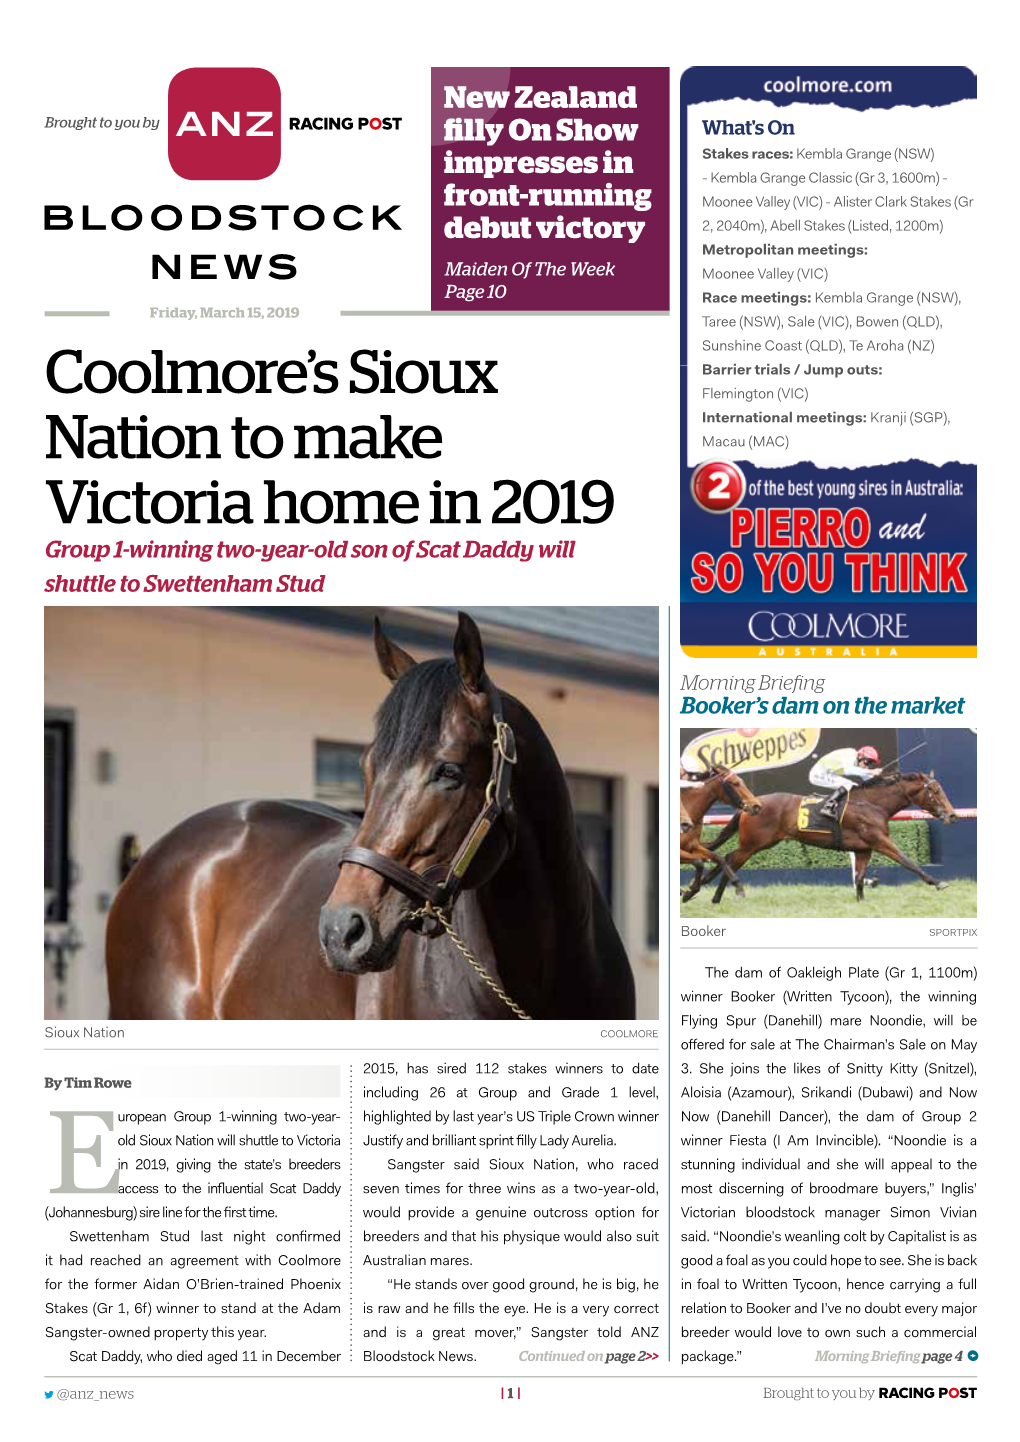 Coolmore's Sioux Nation to Make Victoria Home in 2019